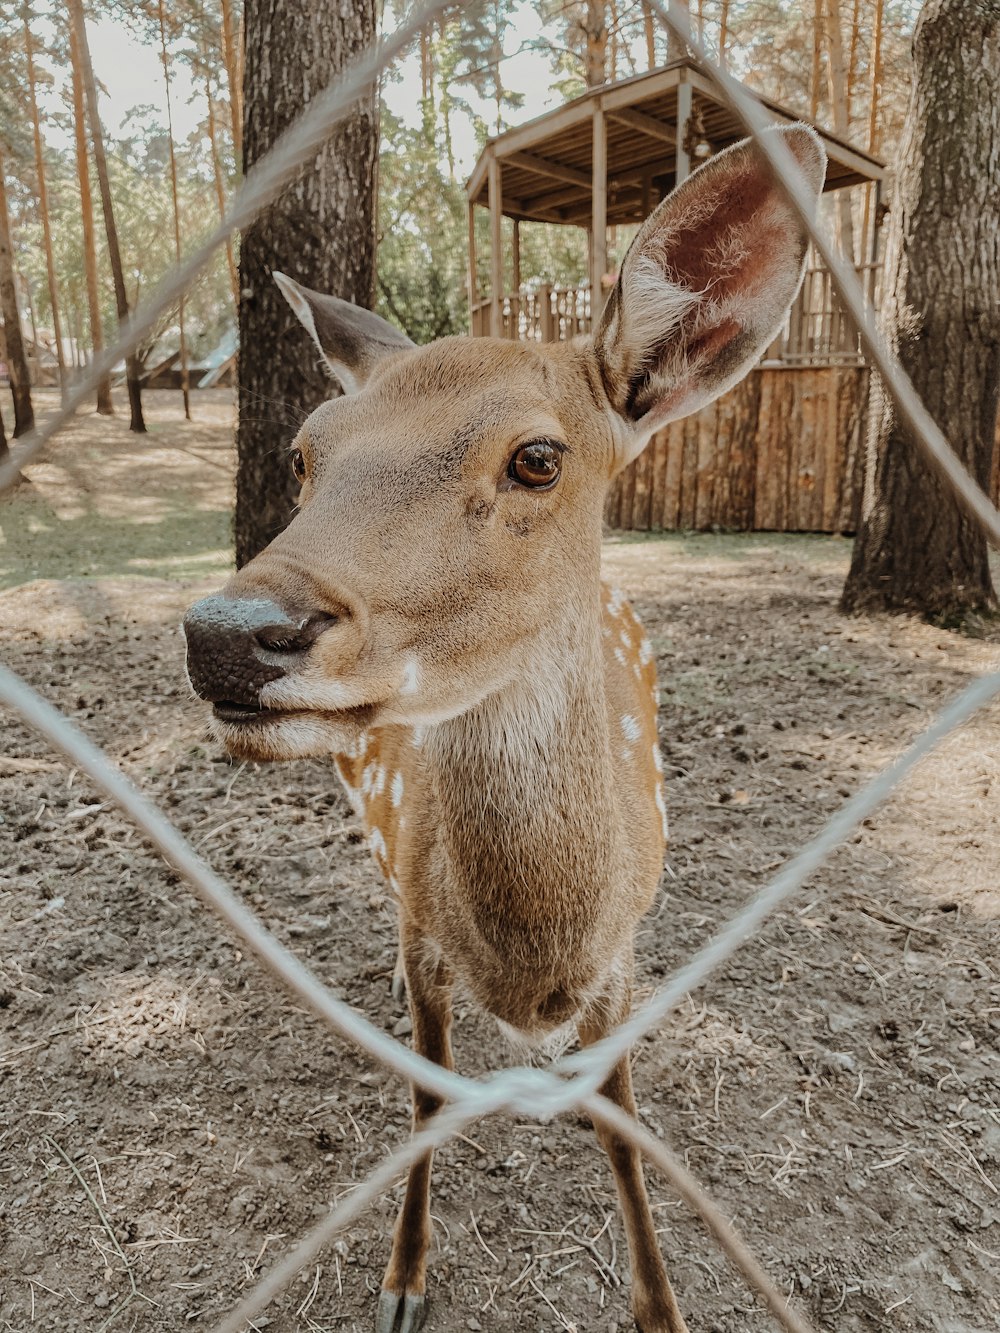 a deer looking through a chain link fence